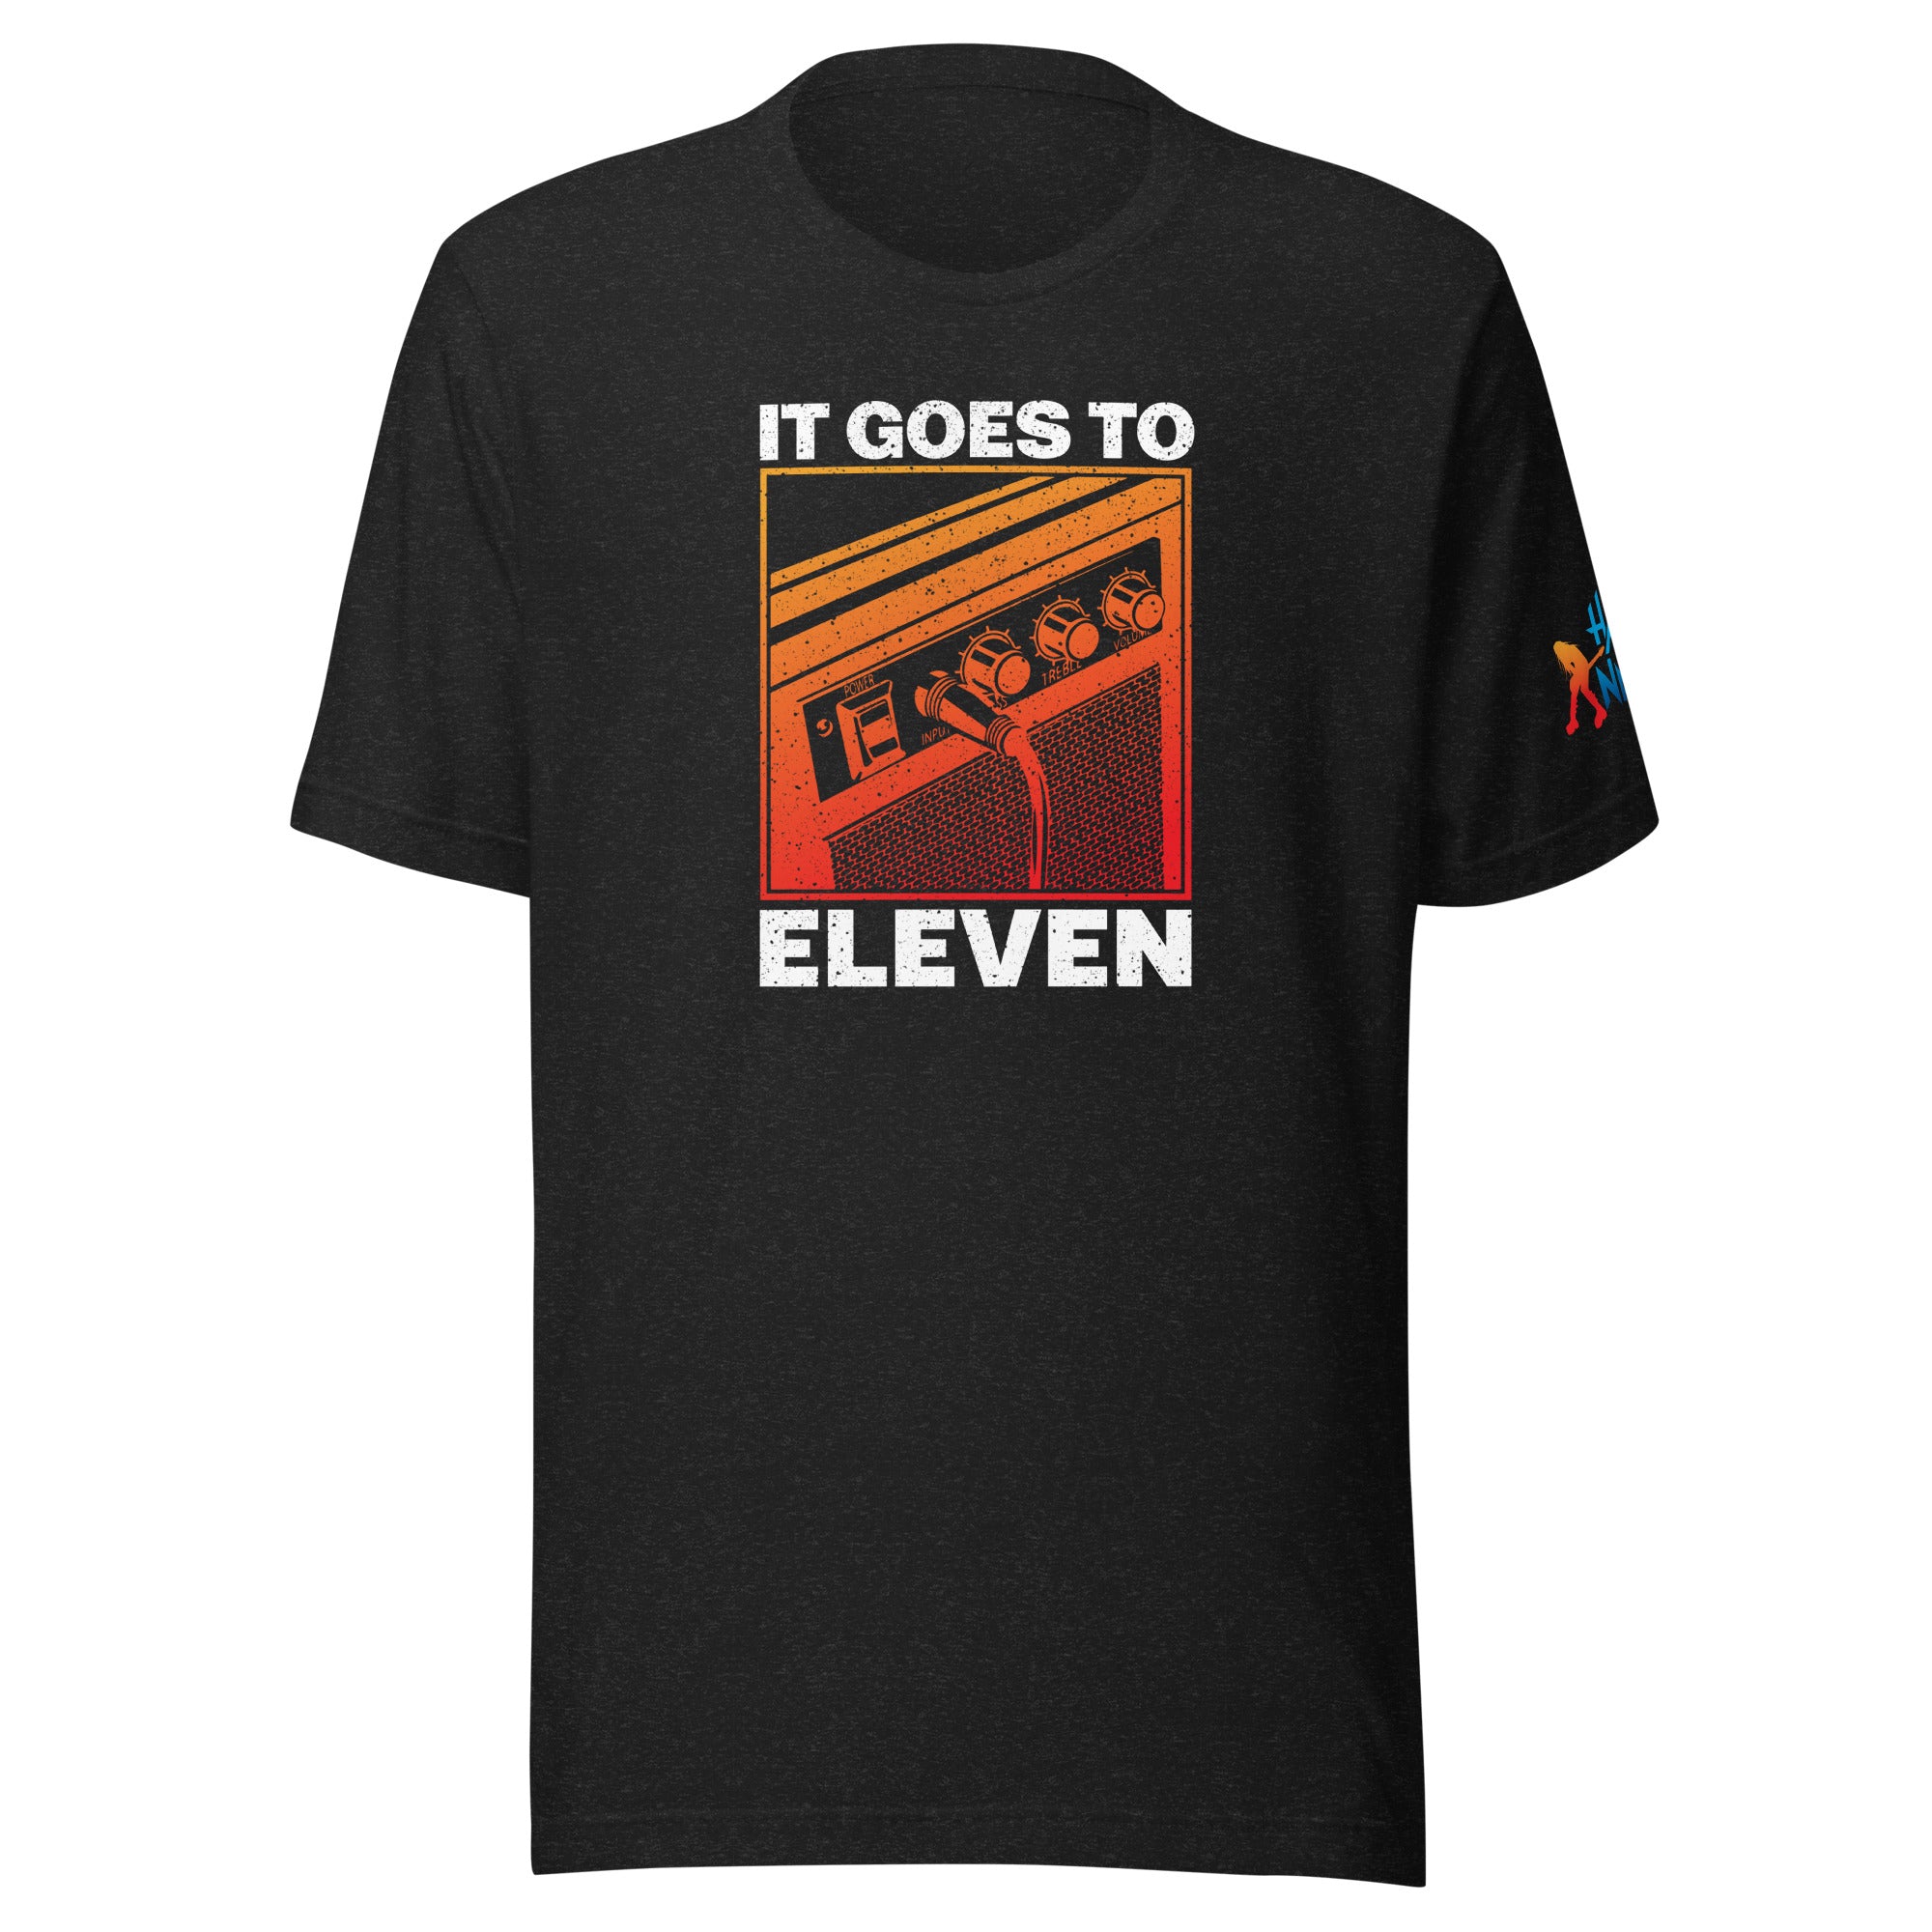 Hair Nation: It Goes to Eleven T-shirt